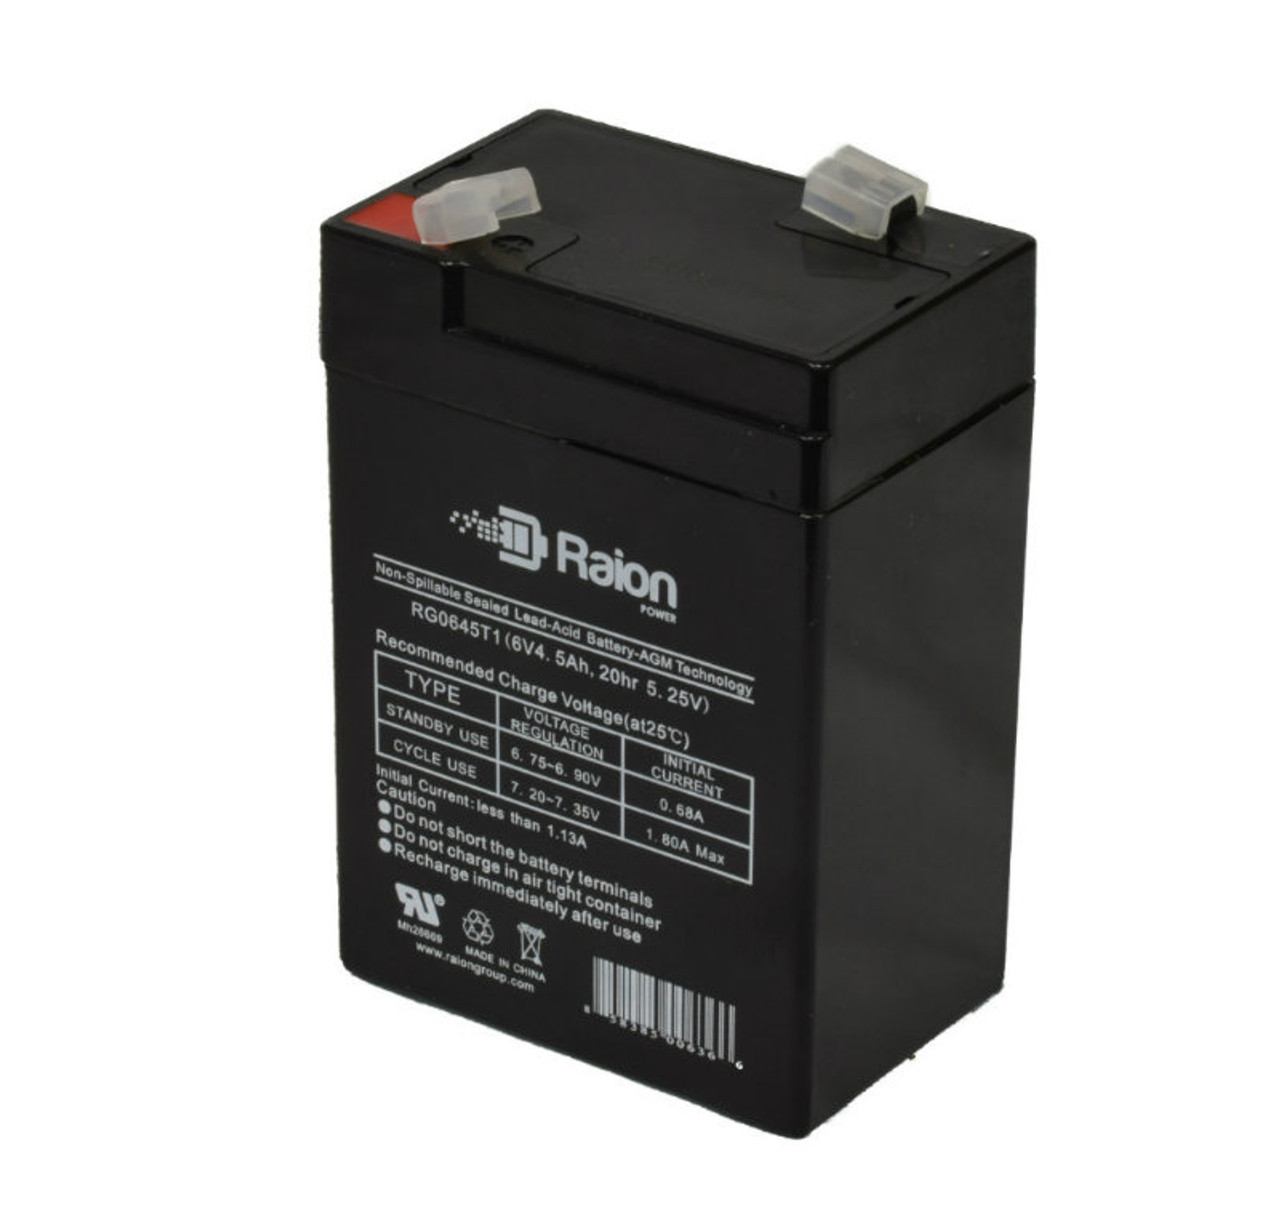 Raion Power RG0645T1 6V 4.5Ah Replacement Battery Cartridge for Zeus PC4.5-6S